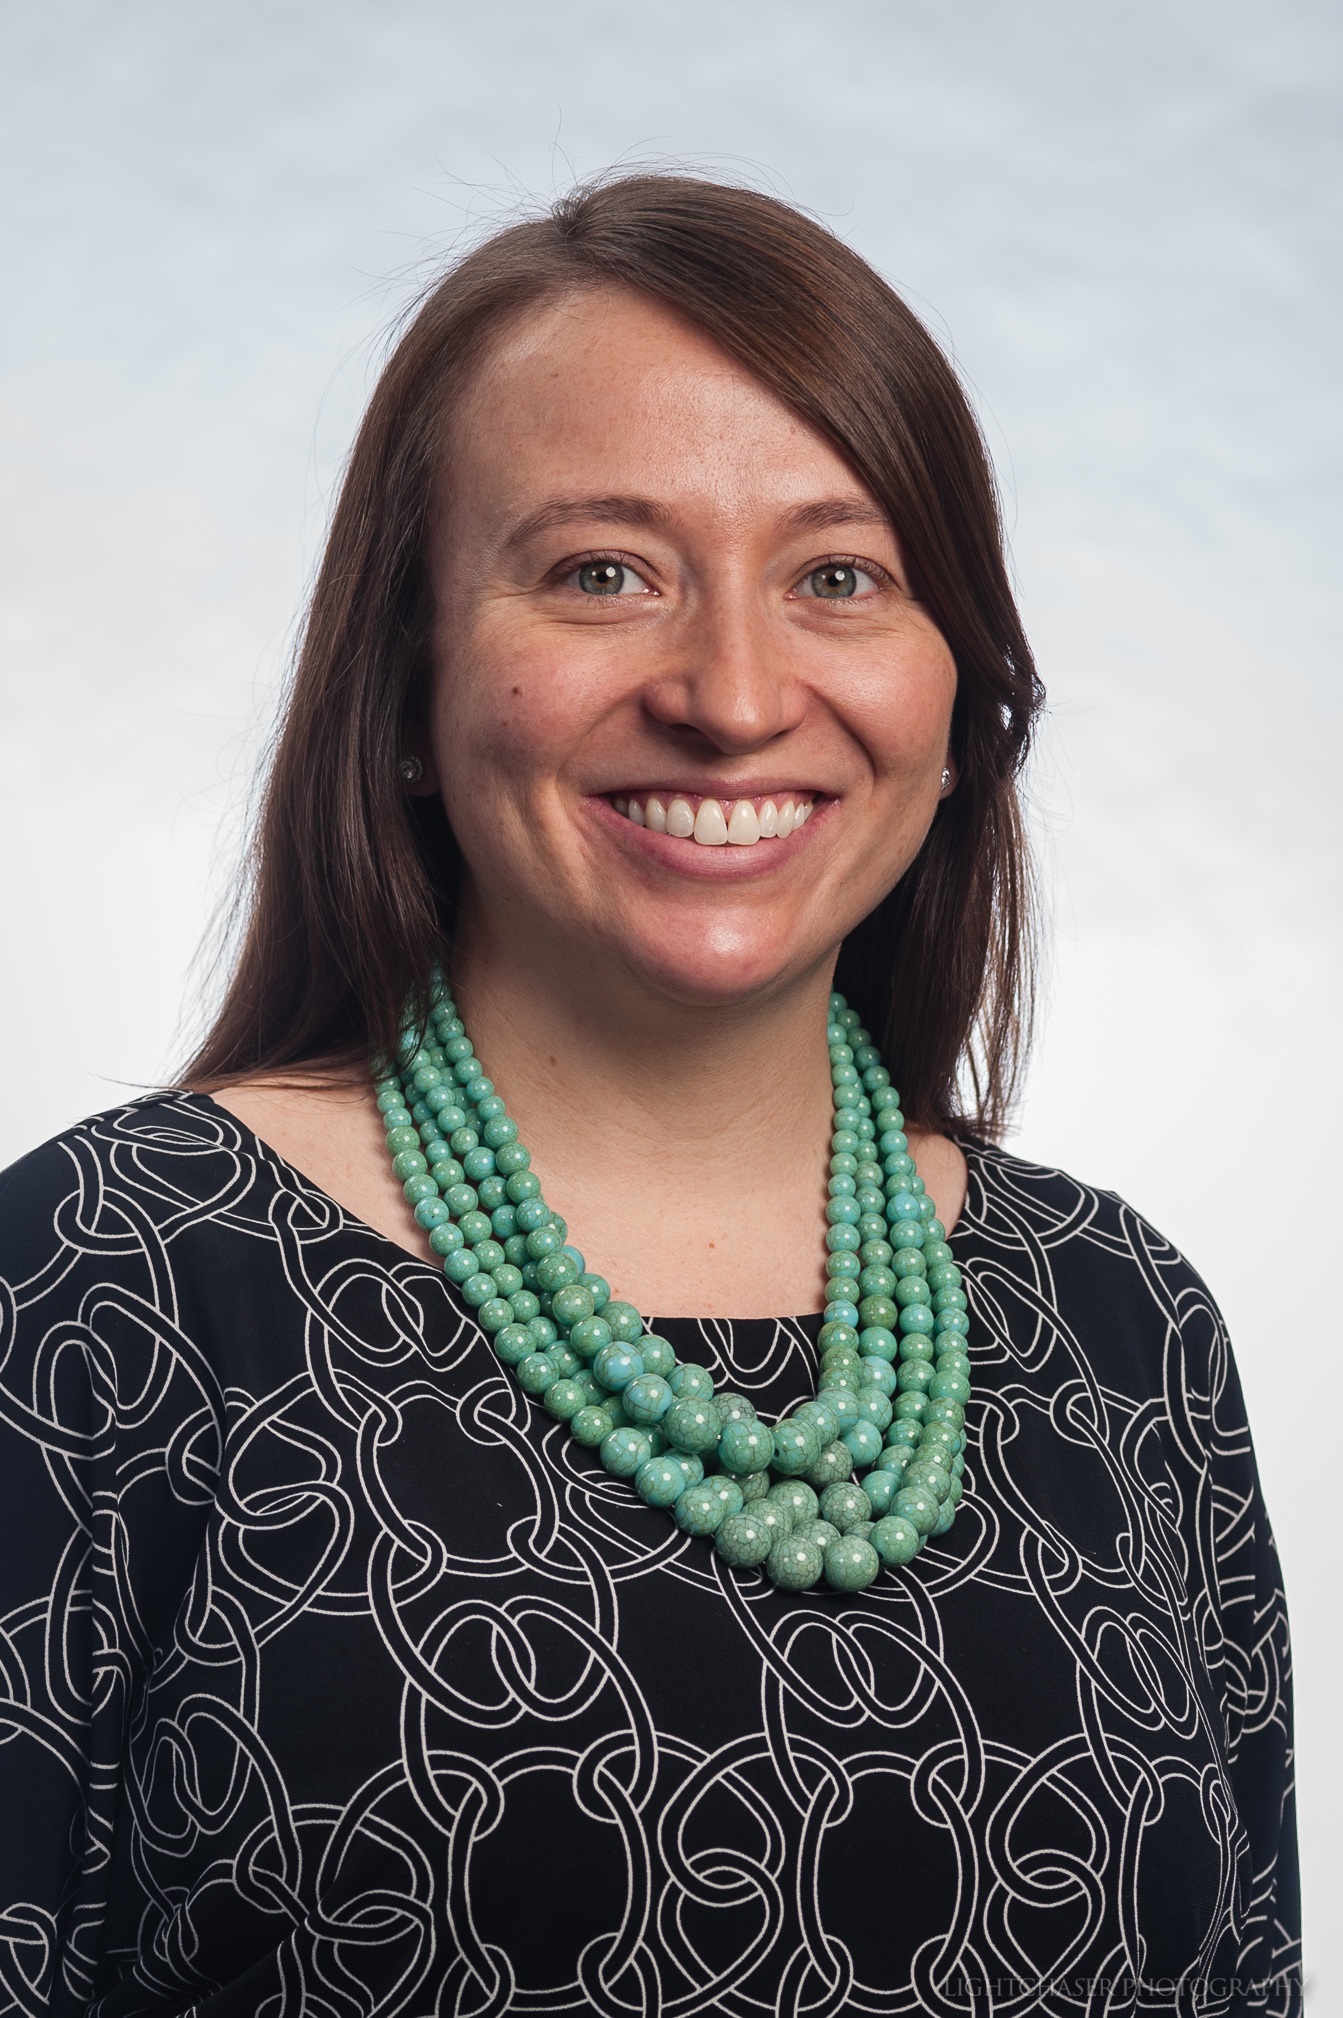 Headshot of Molly, wearing a blue geometric patterned shirt and a green necklace